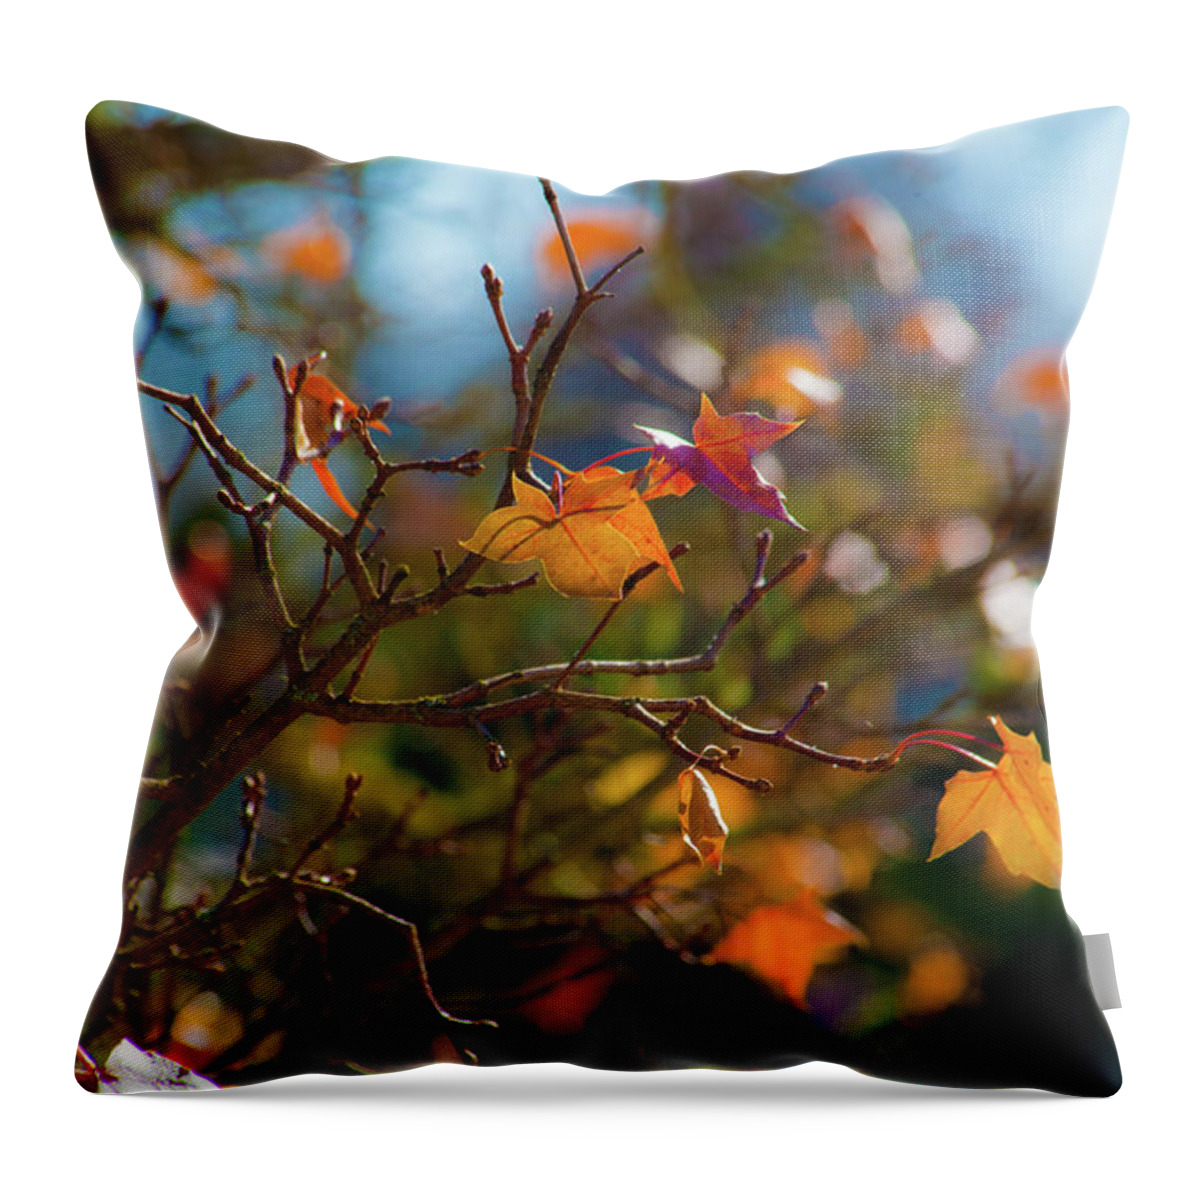 Fall Leaves Throw Pillow featuring the photograph Fiery Autumn by Bonnie Bruno